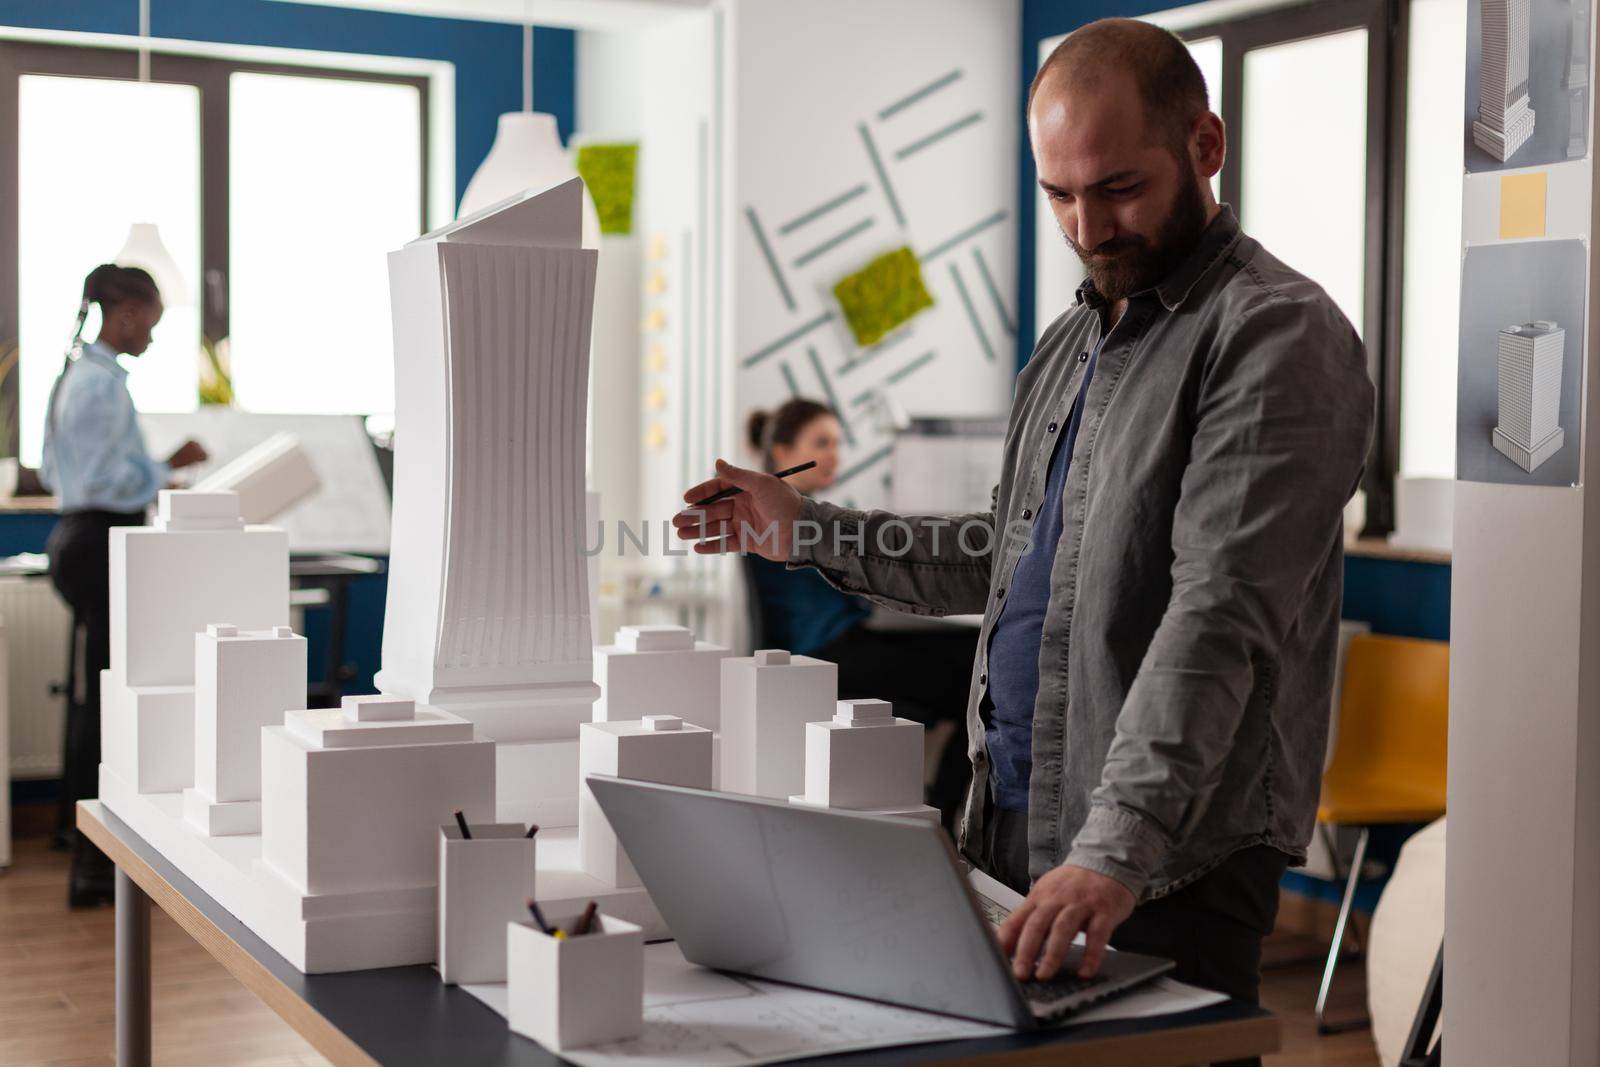 Arhitectural designer in videocall conference presenting white foam building model of residential buildings to client. Architect using laptop computer in modern office next to desk with 3d maquette.